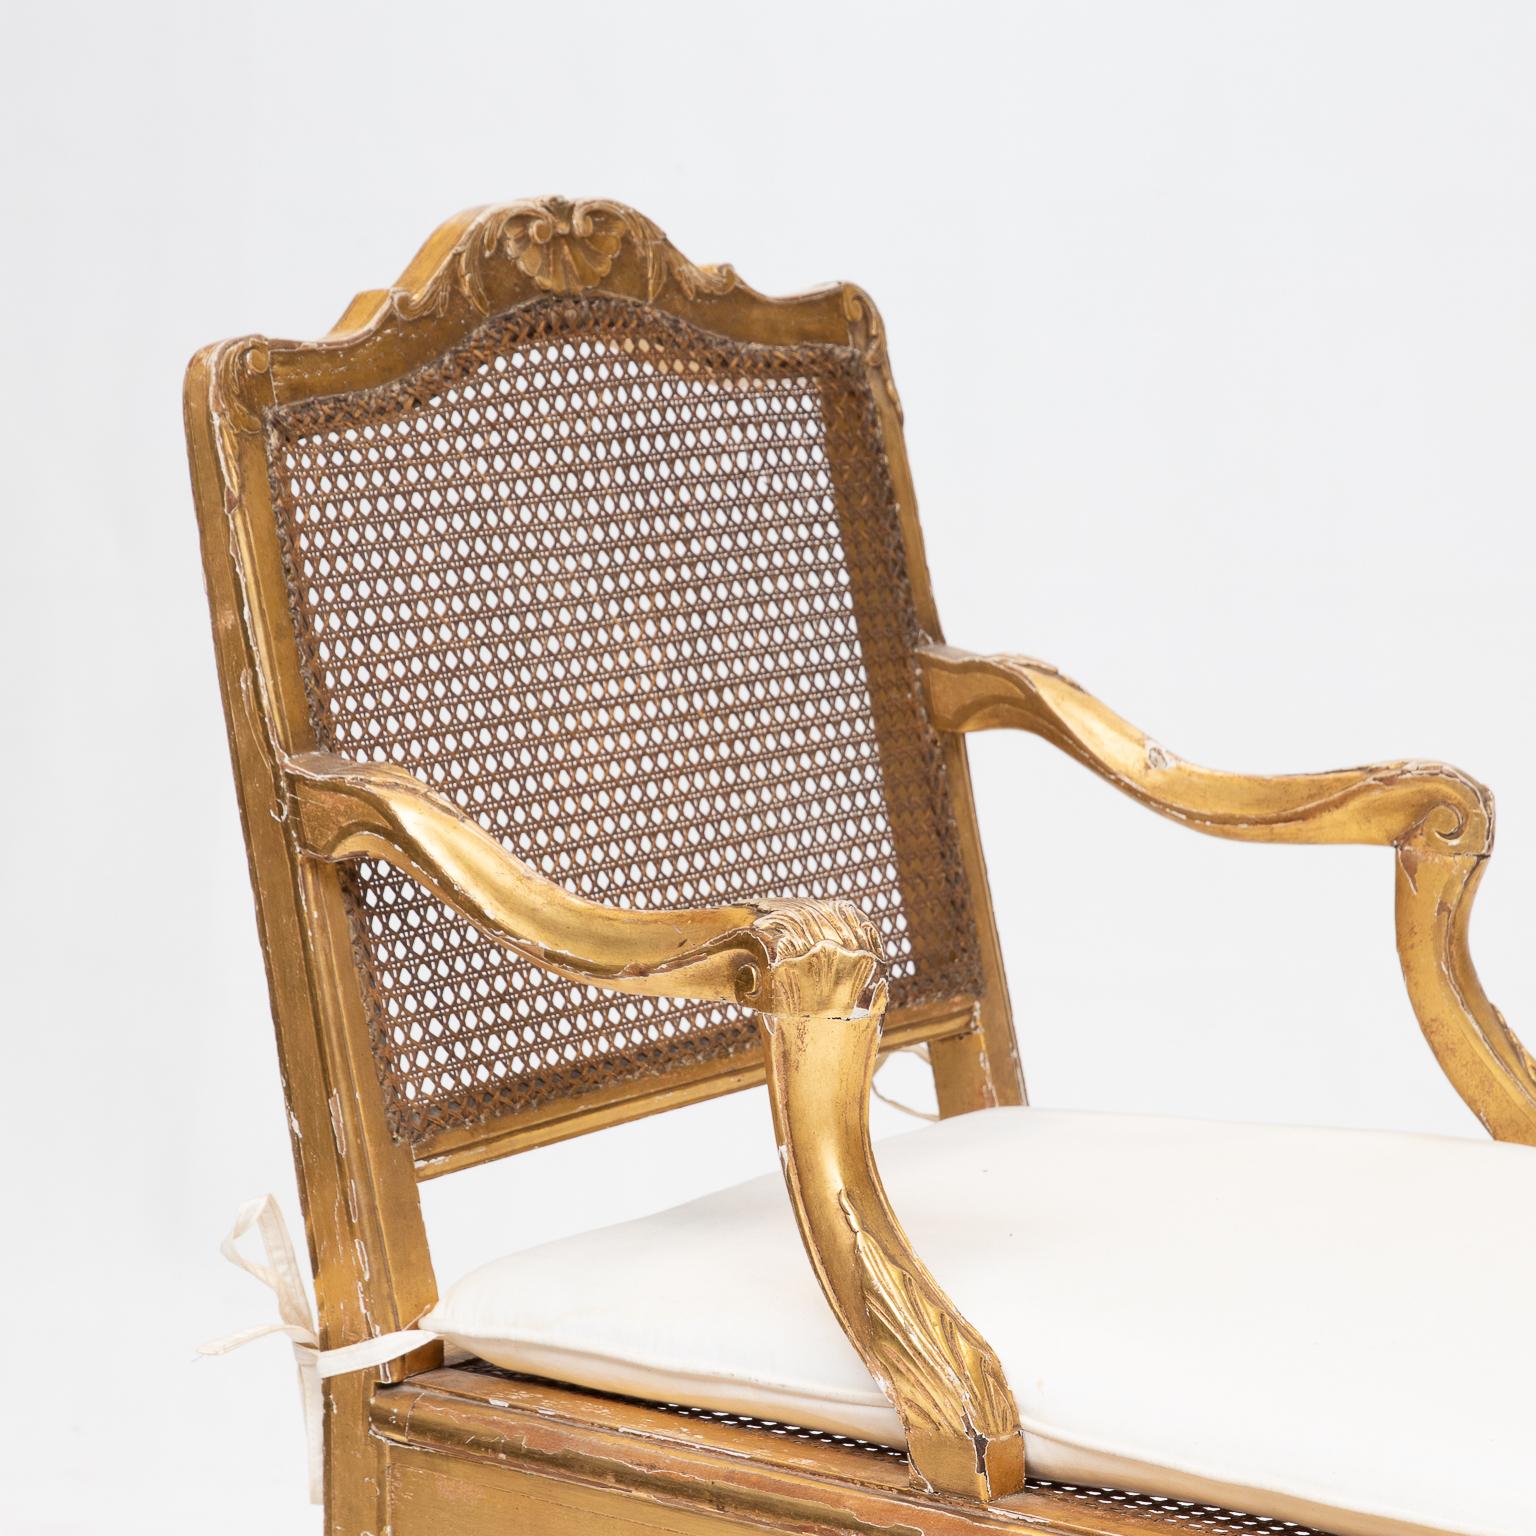 A Louis XV style gold chaise lounge with cushion seat over the cane. The cane is in good condition to the back and seat. Nicely worn gold finish with gesso showing through. Very unique size. Ready for use.